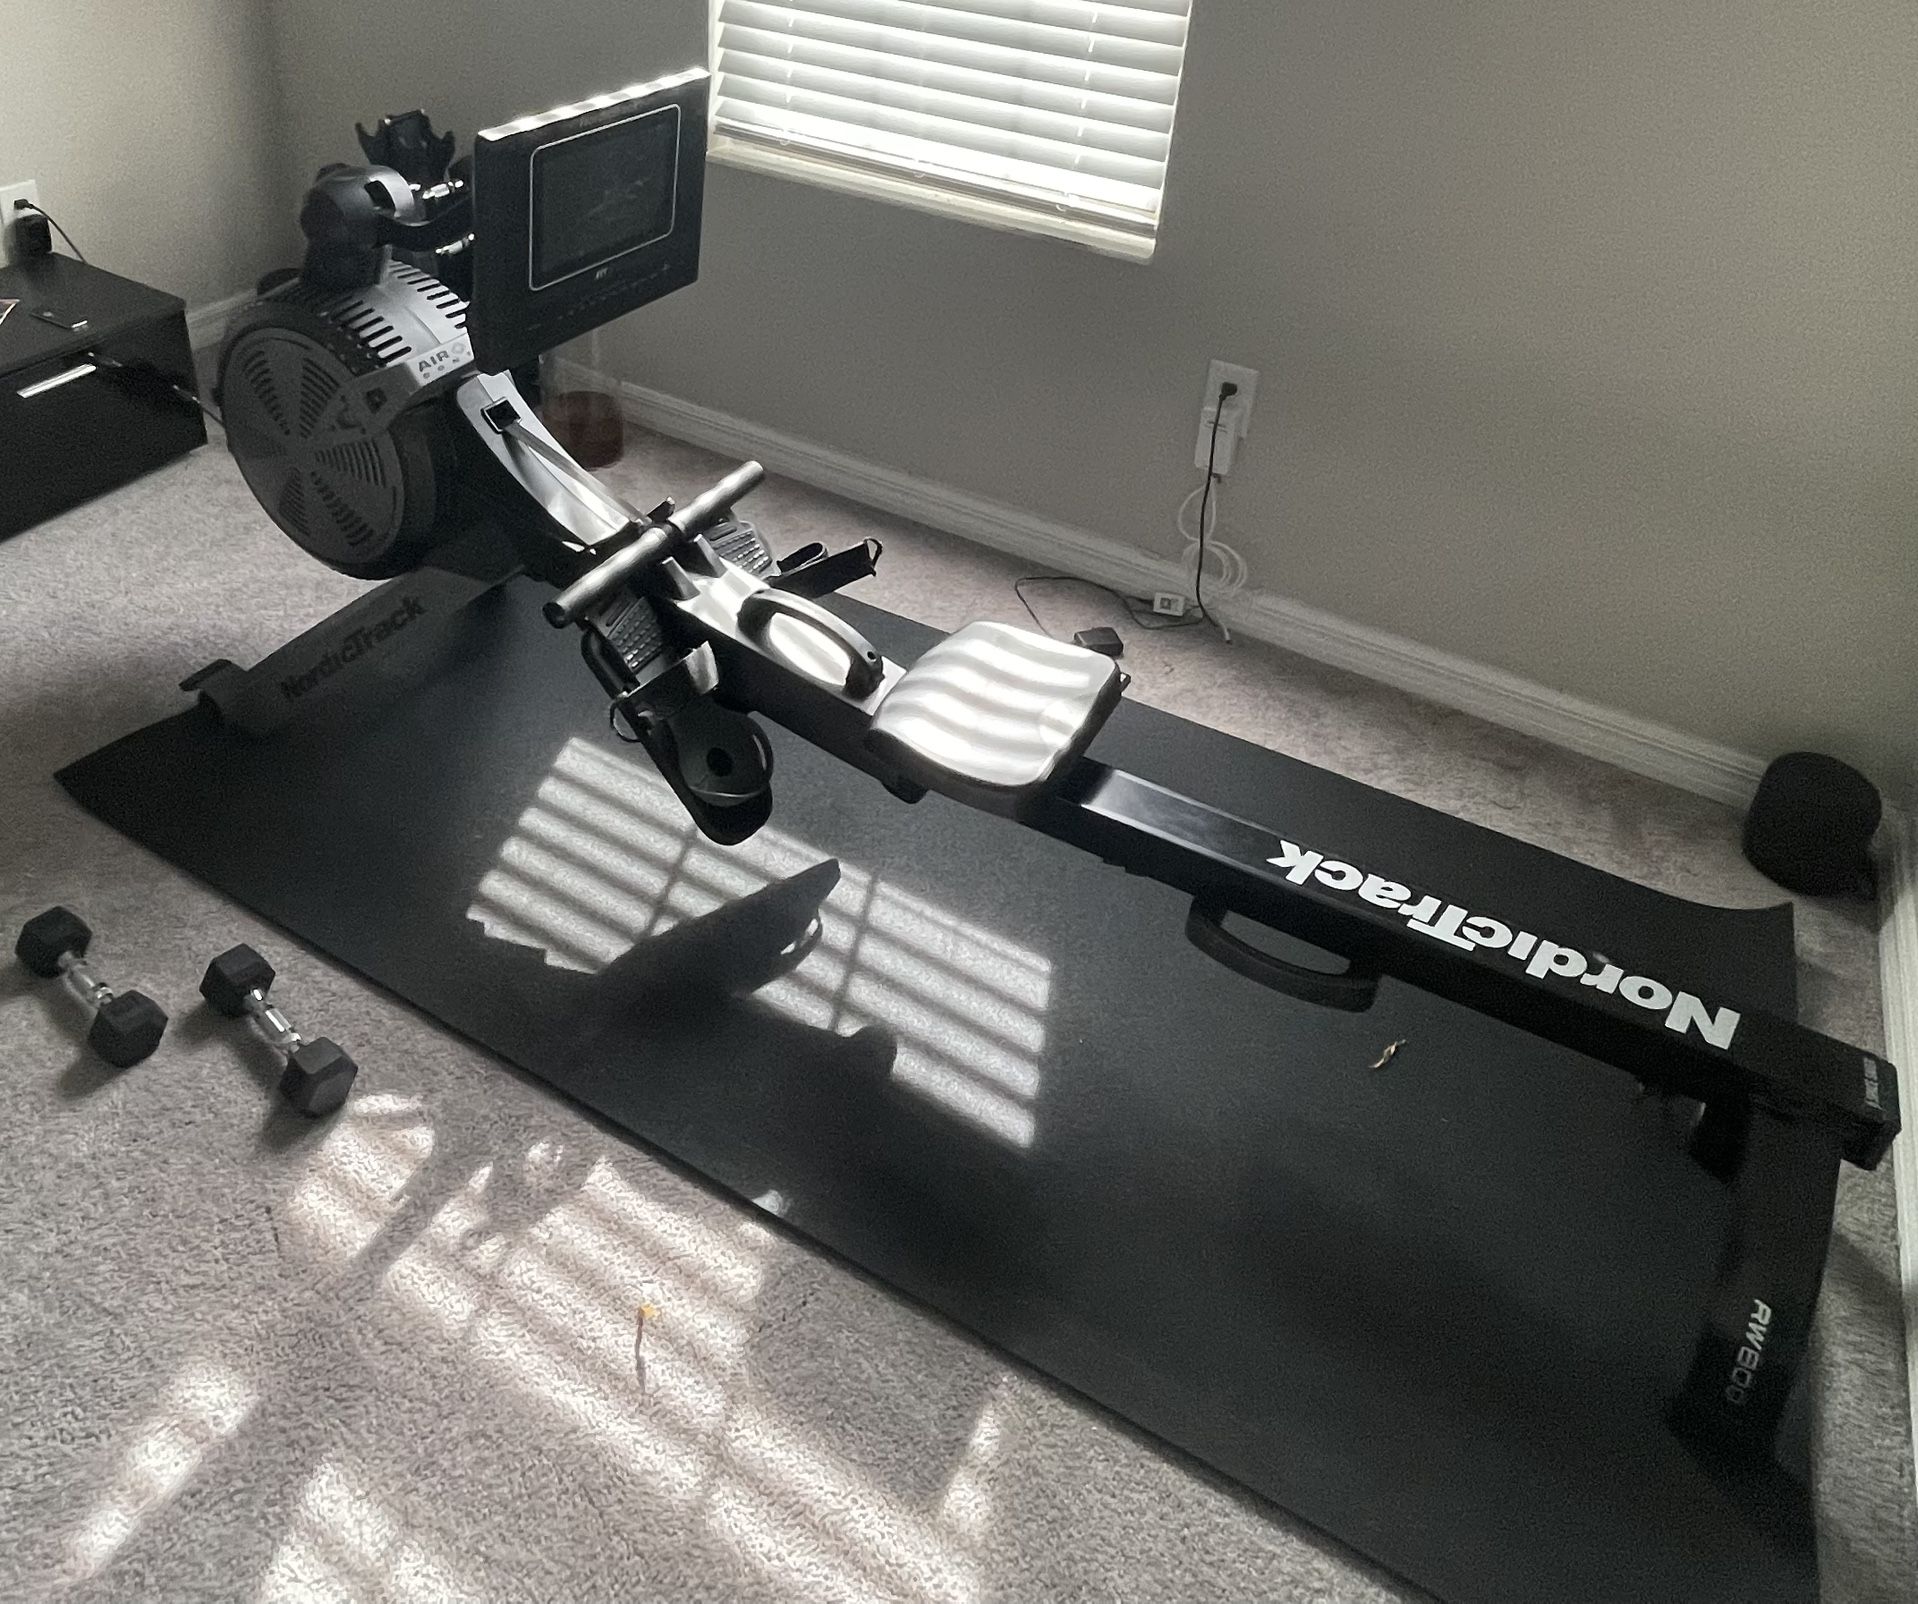 NordicTrack Rowing Machine Like New